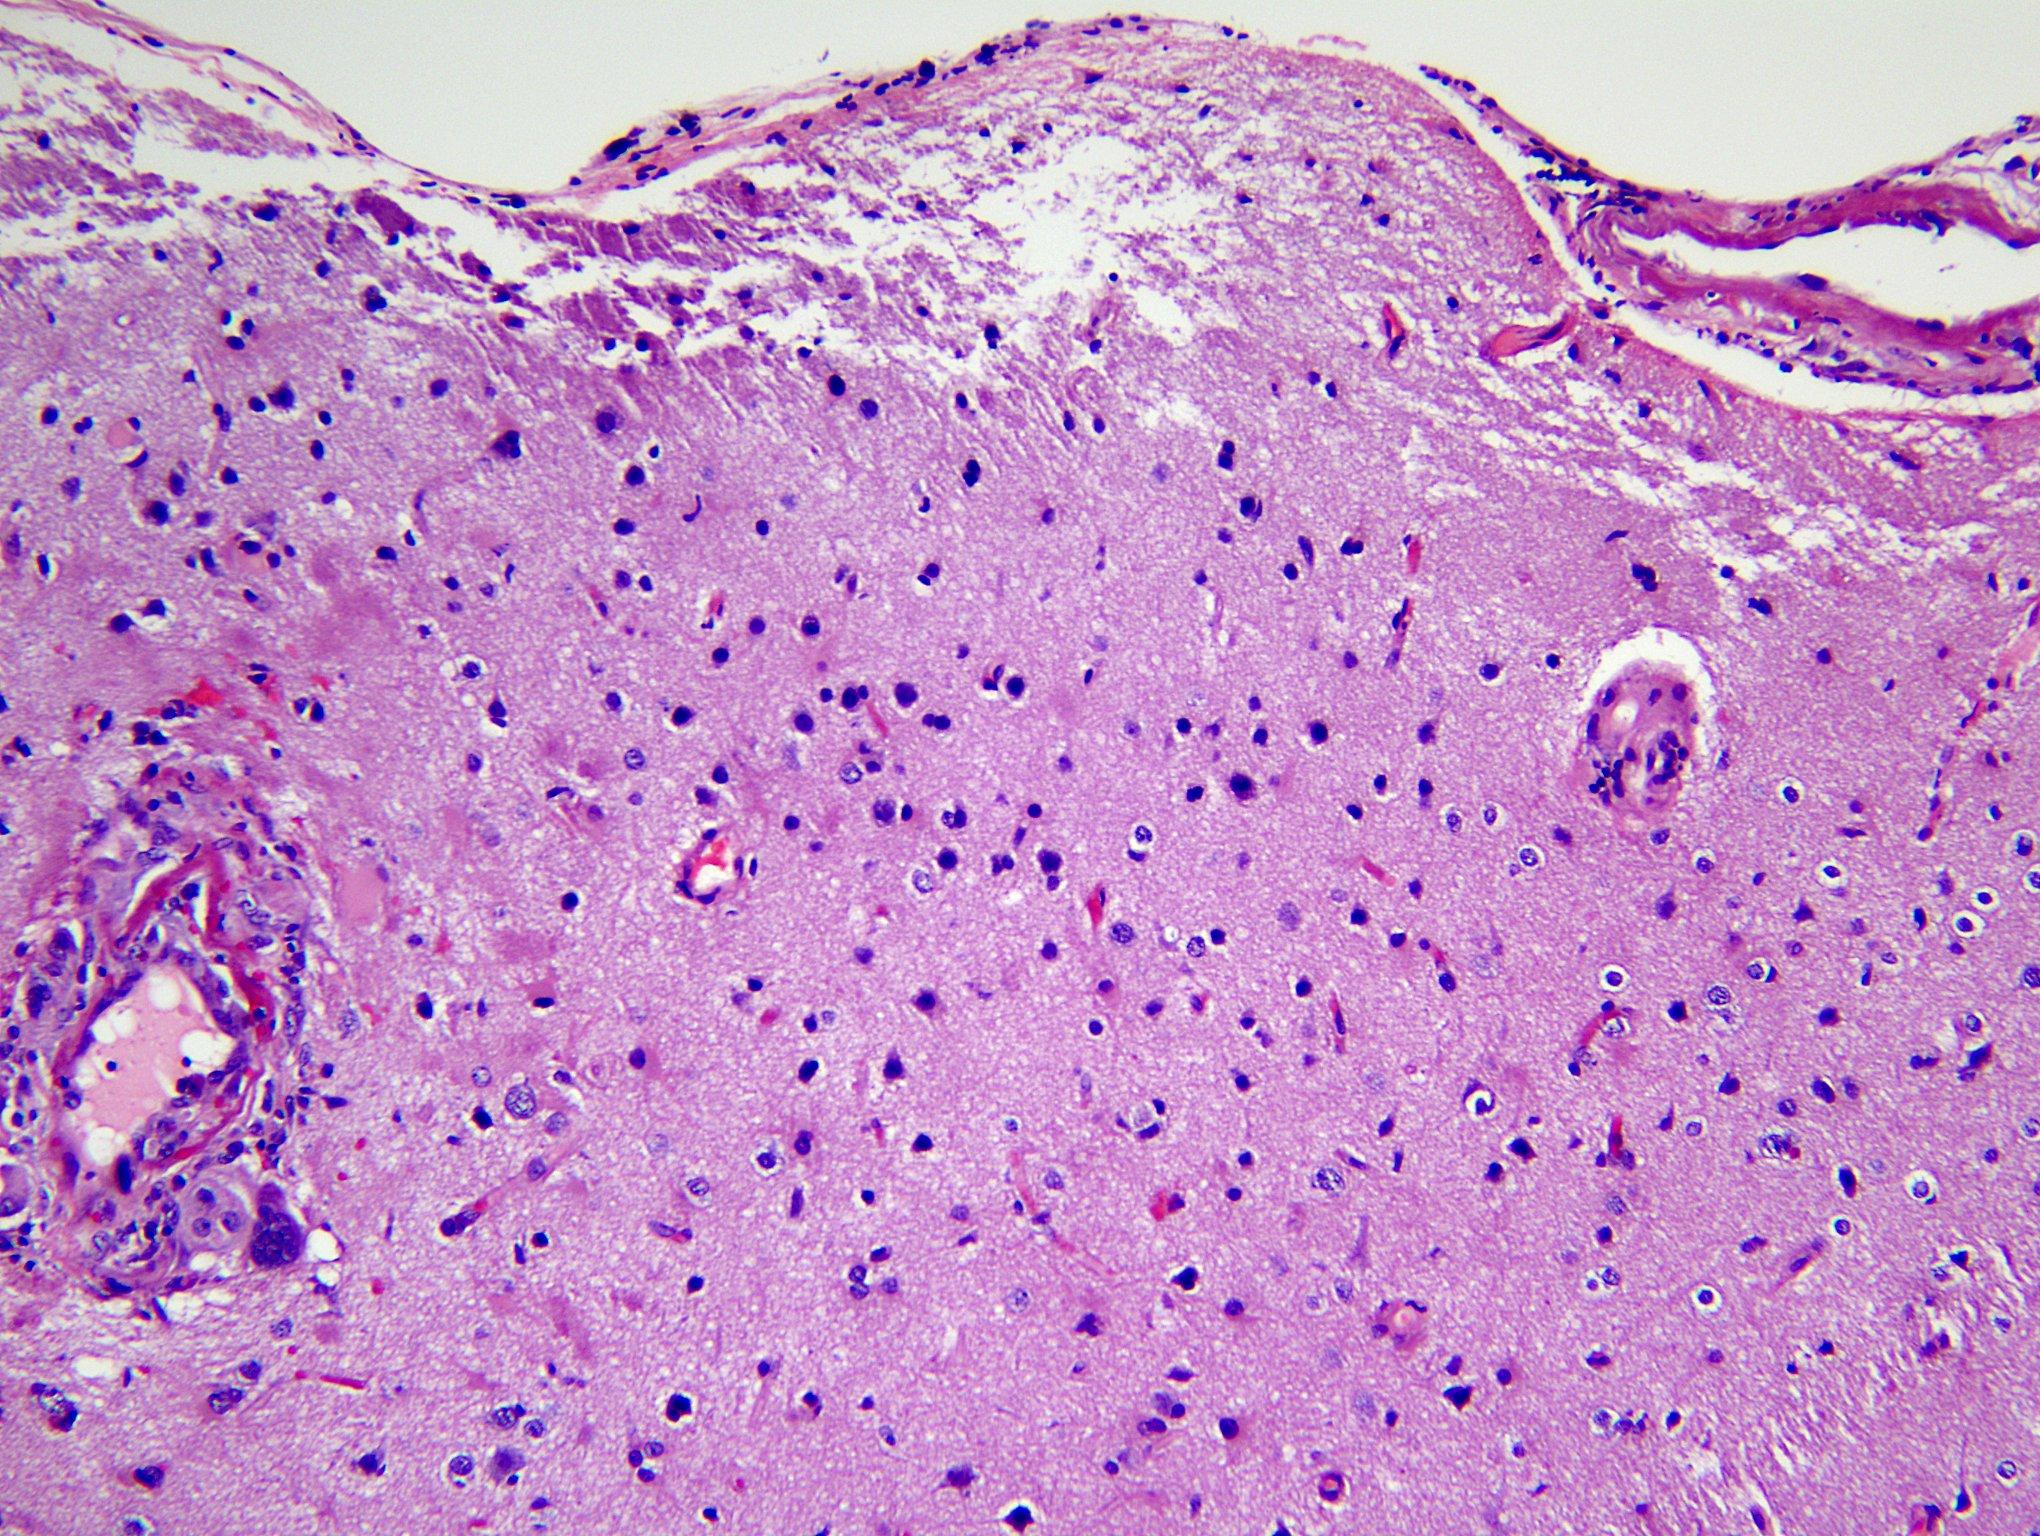  Amyloid beta related angiitis, H&E stained x 100